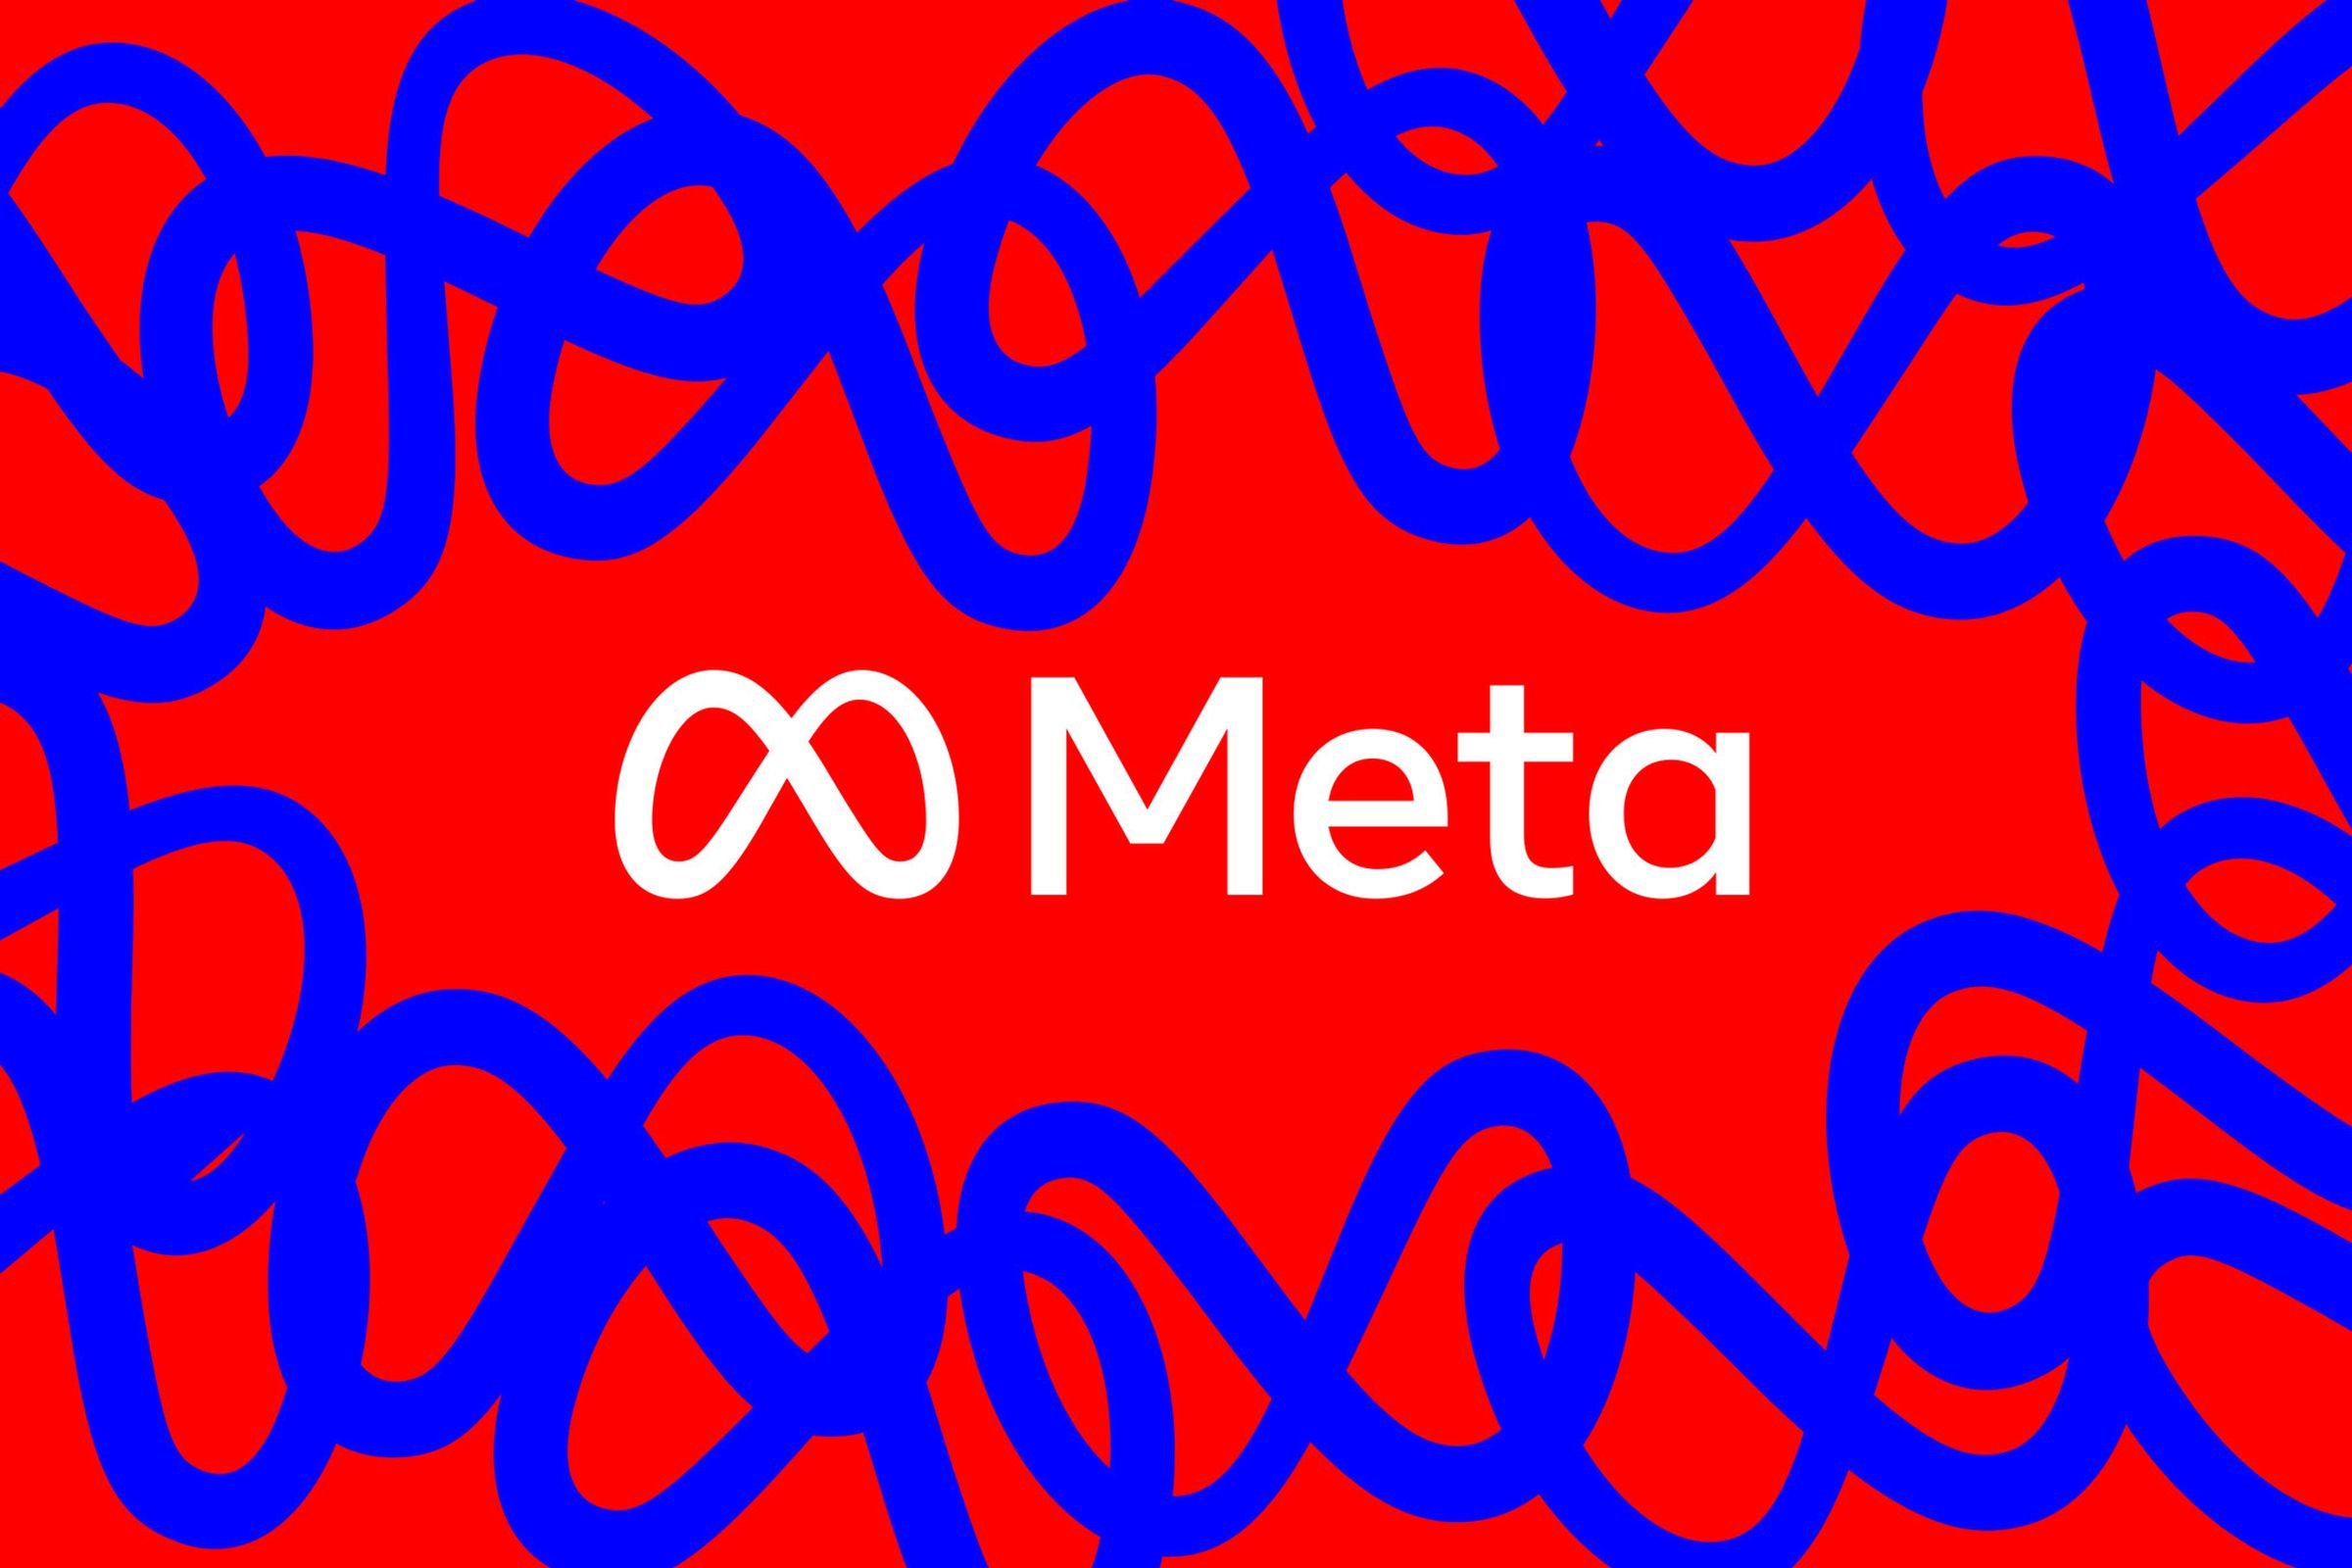 Image of Meta’s word mark on a red background.